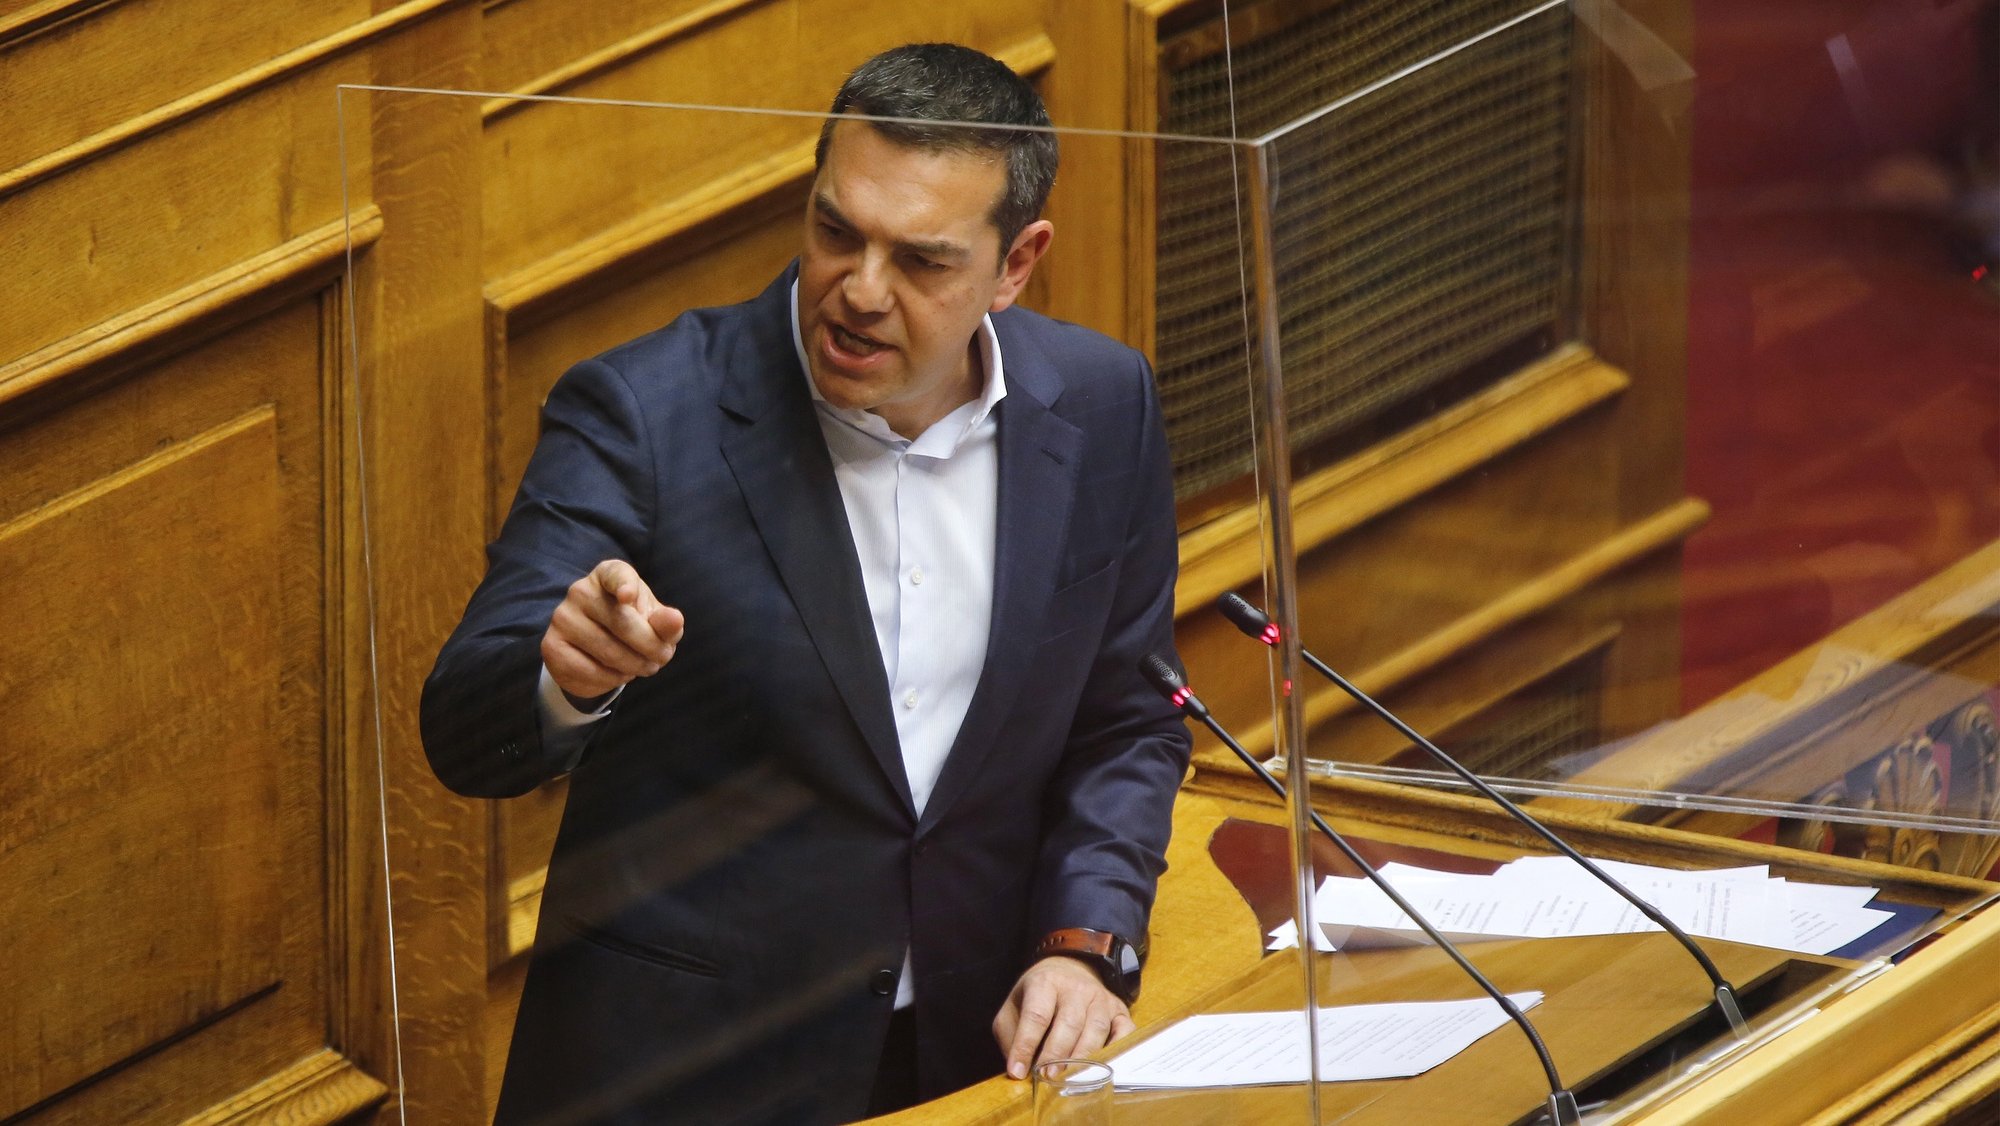 epa09718672 Greek main opposition SYRIZA - Progressive Alliance leader Alexis Tsipras delivers a speech during a debate on a motion of censure against the government at the Greek Parliament, in Athens, Greece, 30 January 2022. The censure motion was introduced by Tsipras, who said that a series of crises like the pandemic, price hikes, and snowstorm management &#039;prove that Prime Minister Kyriakos Mitsotakis and his government are ineffective and dangerous for the country.&#039;  EPA/ALEXANDROS VLACHOS